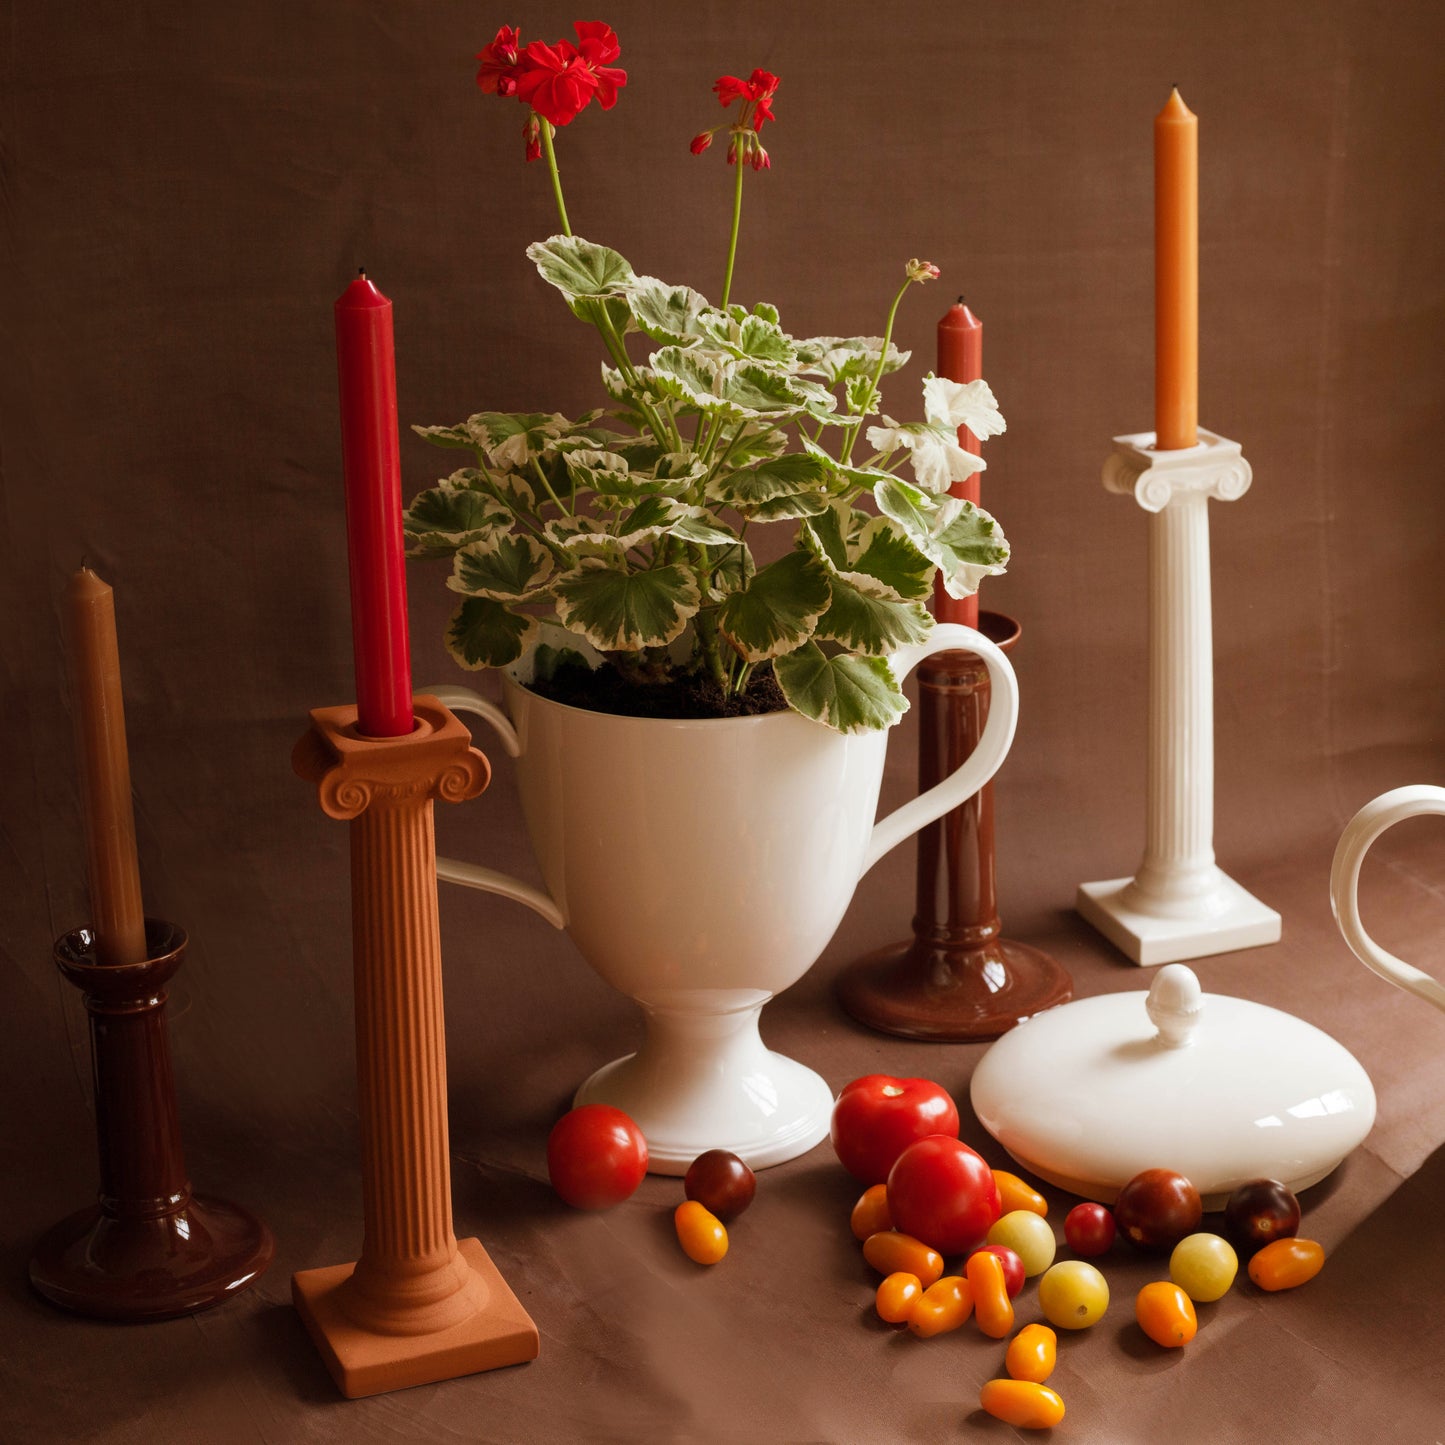 SPECIAL OFFER: Receive a complimentary selection of dinner candles with every pair of P&H Ionic Candlesticks